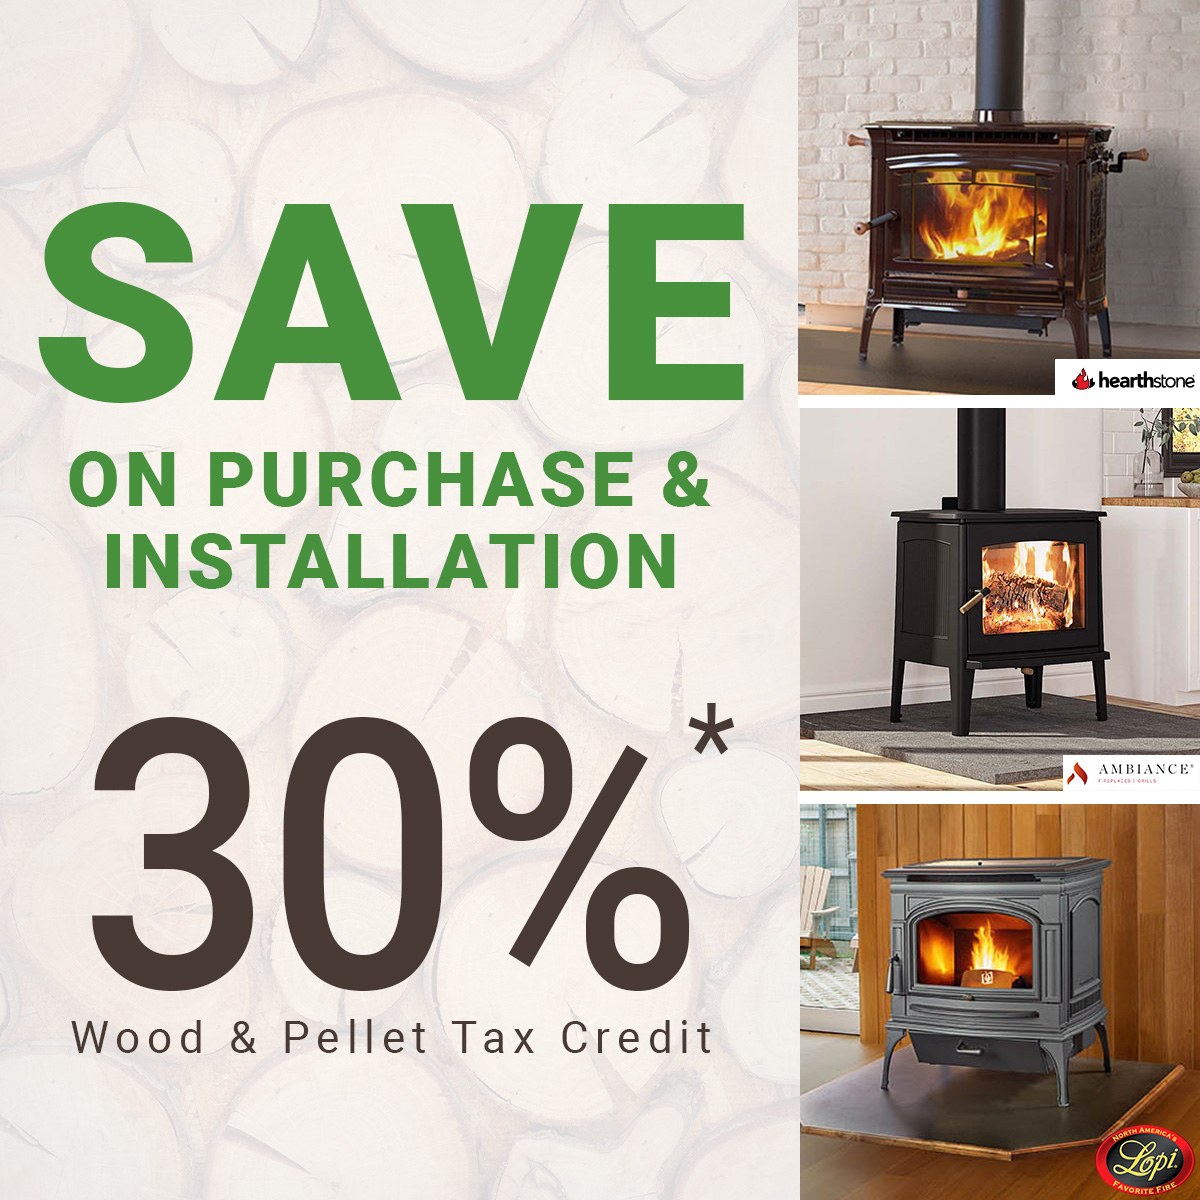 save 30% on purchase and installation of select wood and pellet units with the new federal tax credit. up to $2,000 annually